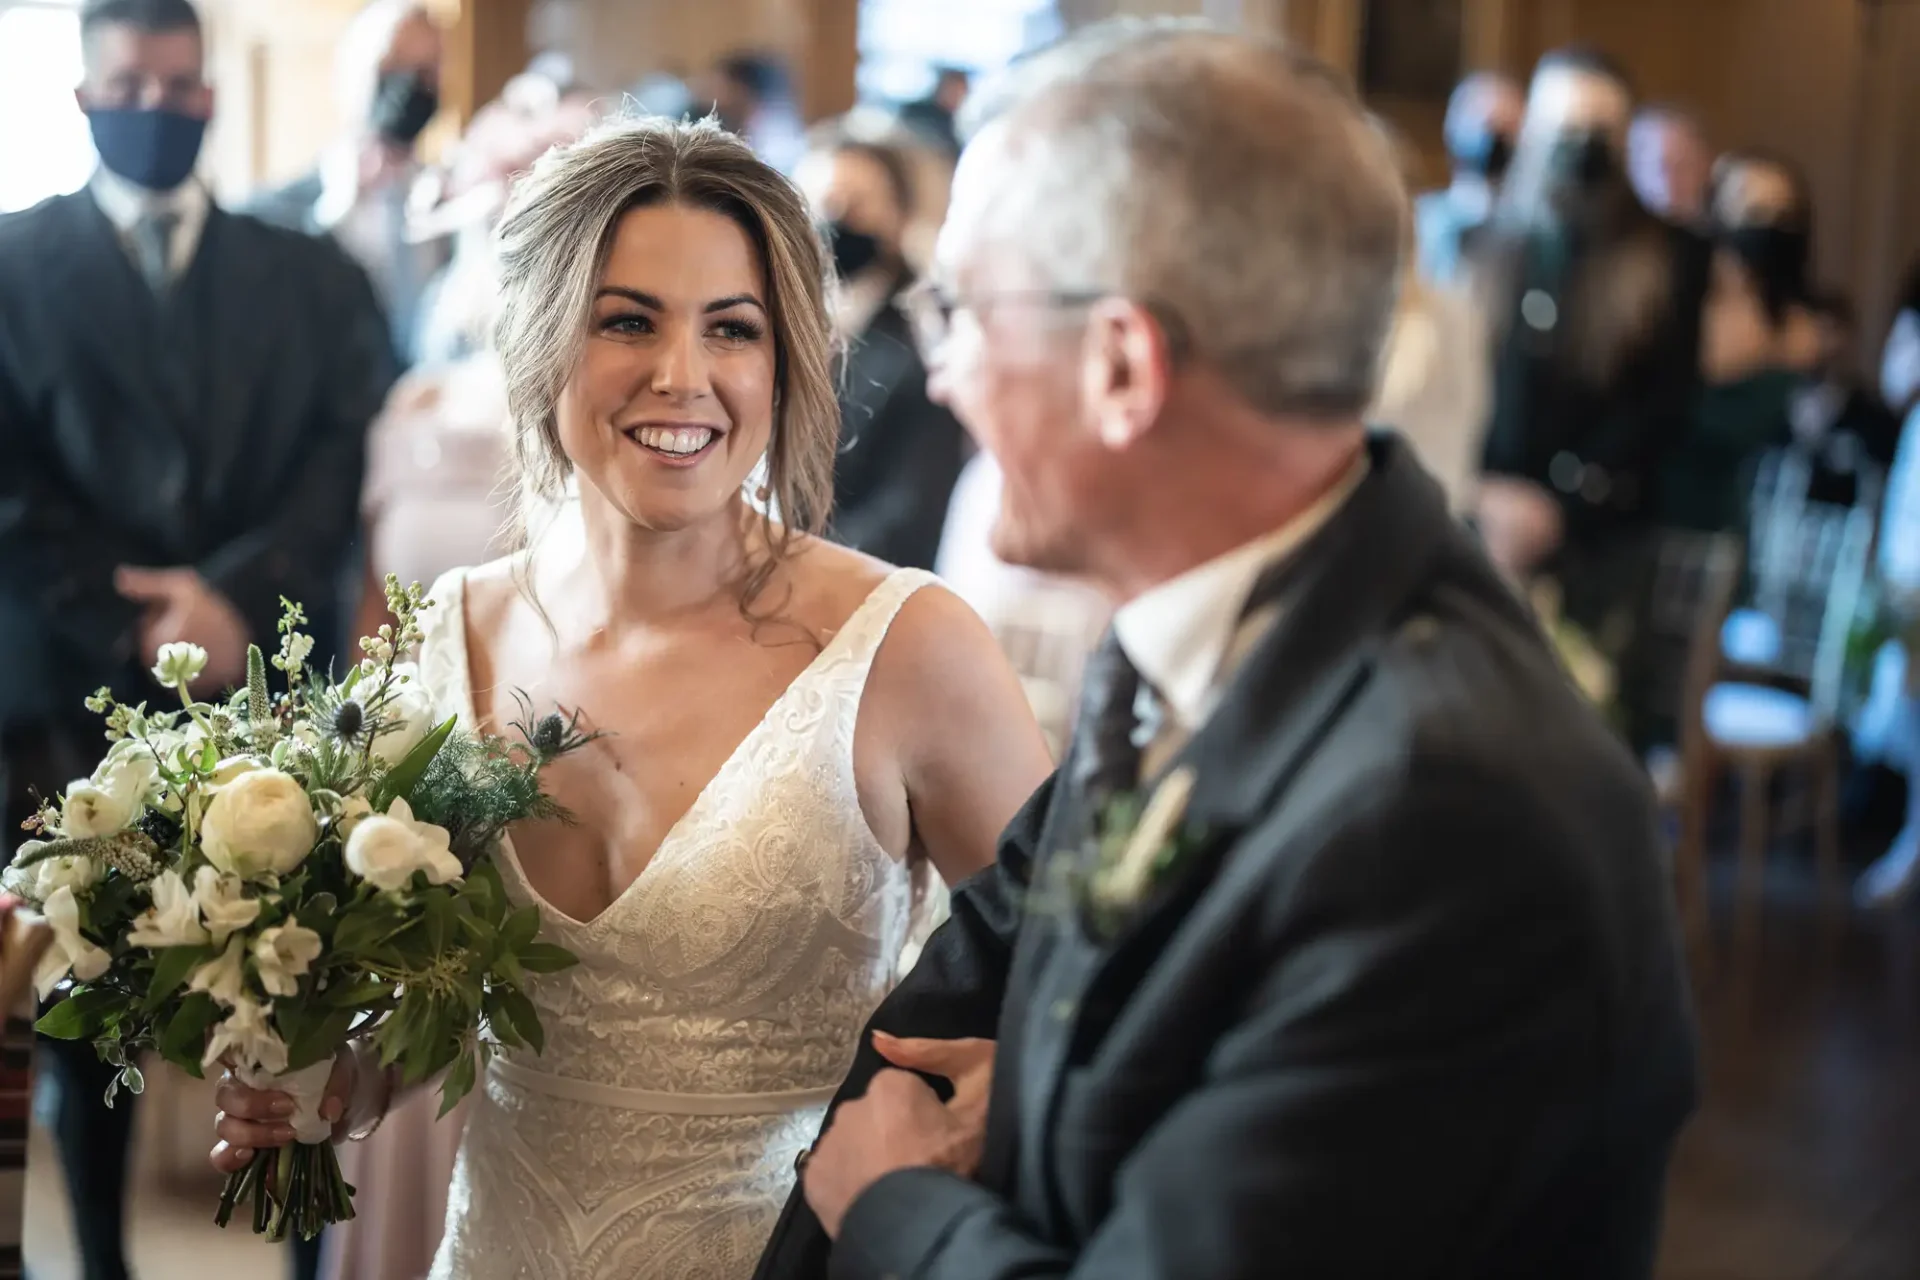 A bride holding a bouquet smiling at an older man in a suit while walking down the aisle, with guests wearing masks in the background.